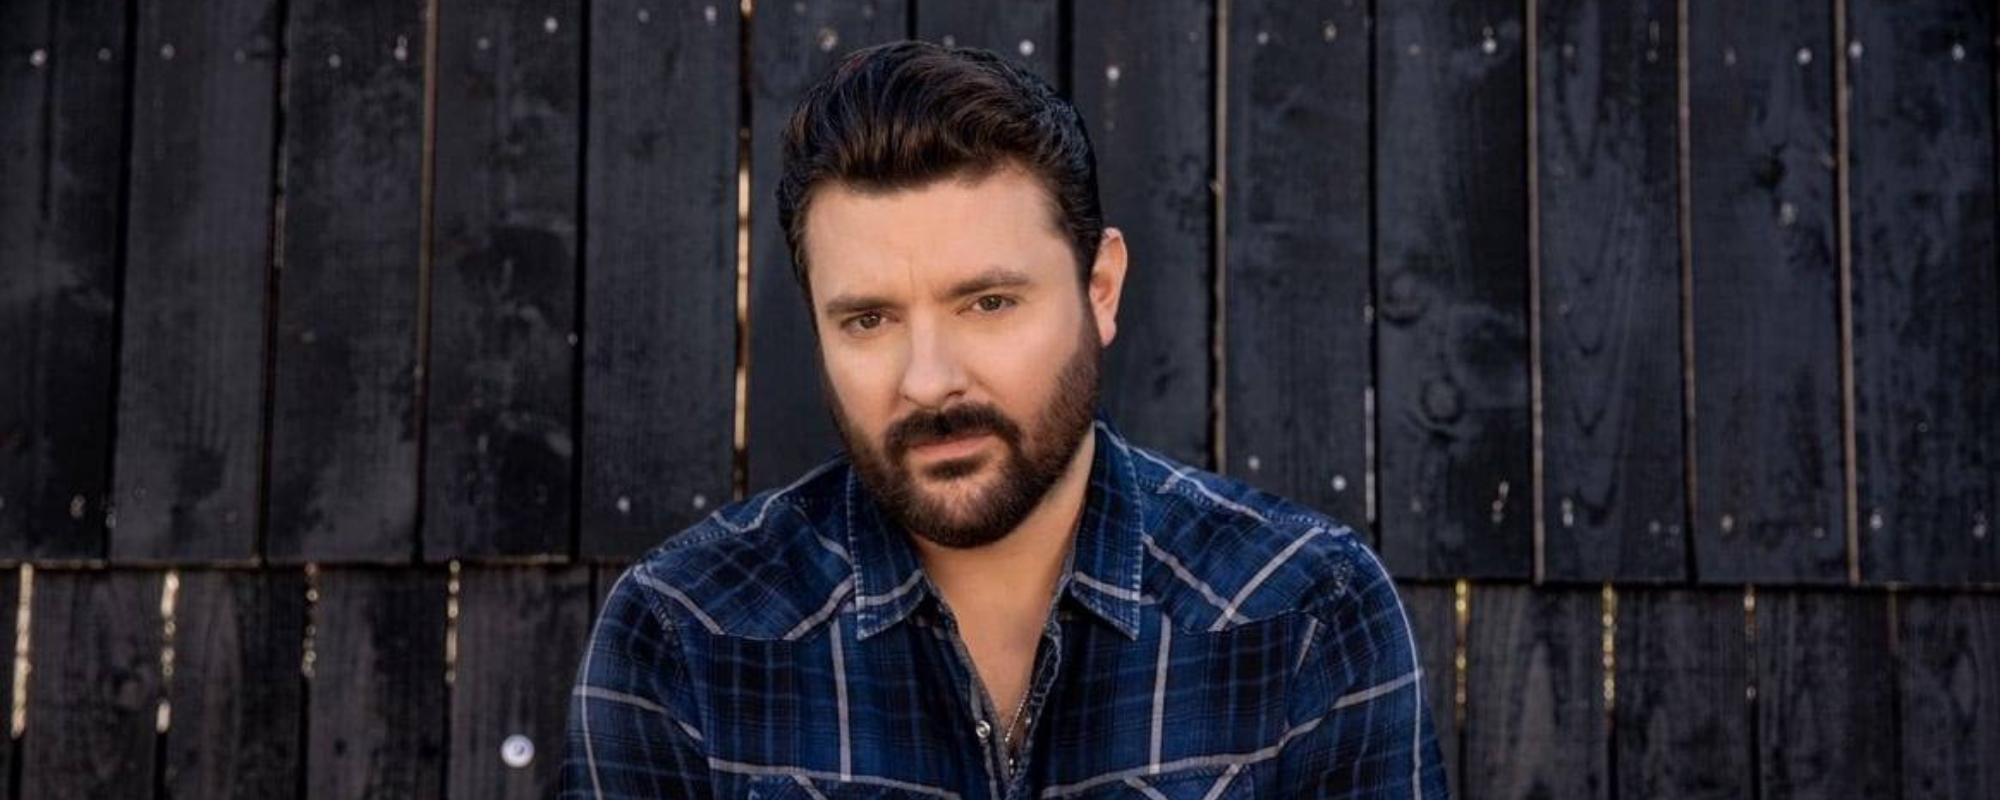 Behind the Song:  “At The End of The Bar” By Chris Young, Mitchell Tenpenny